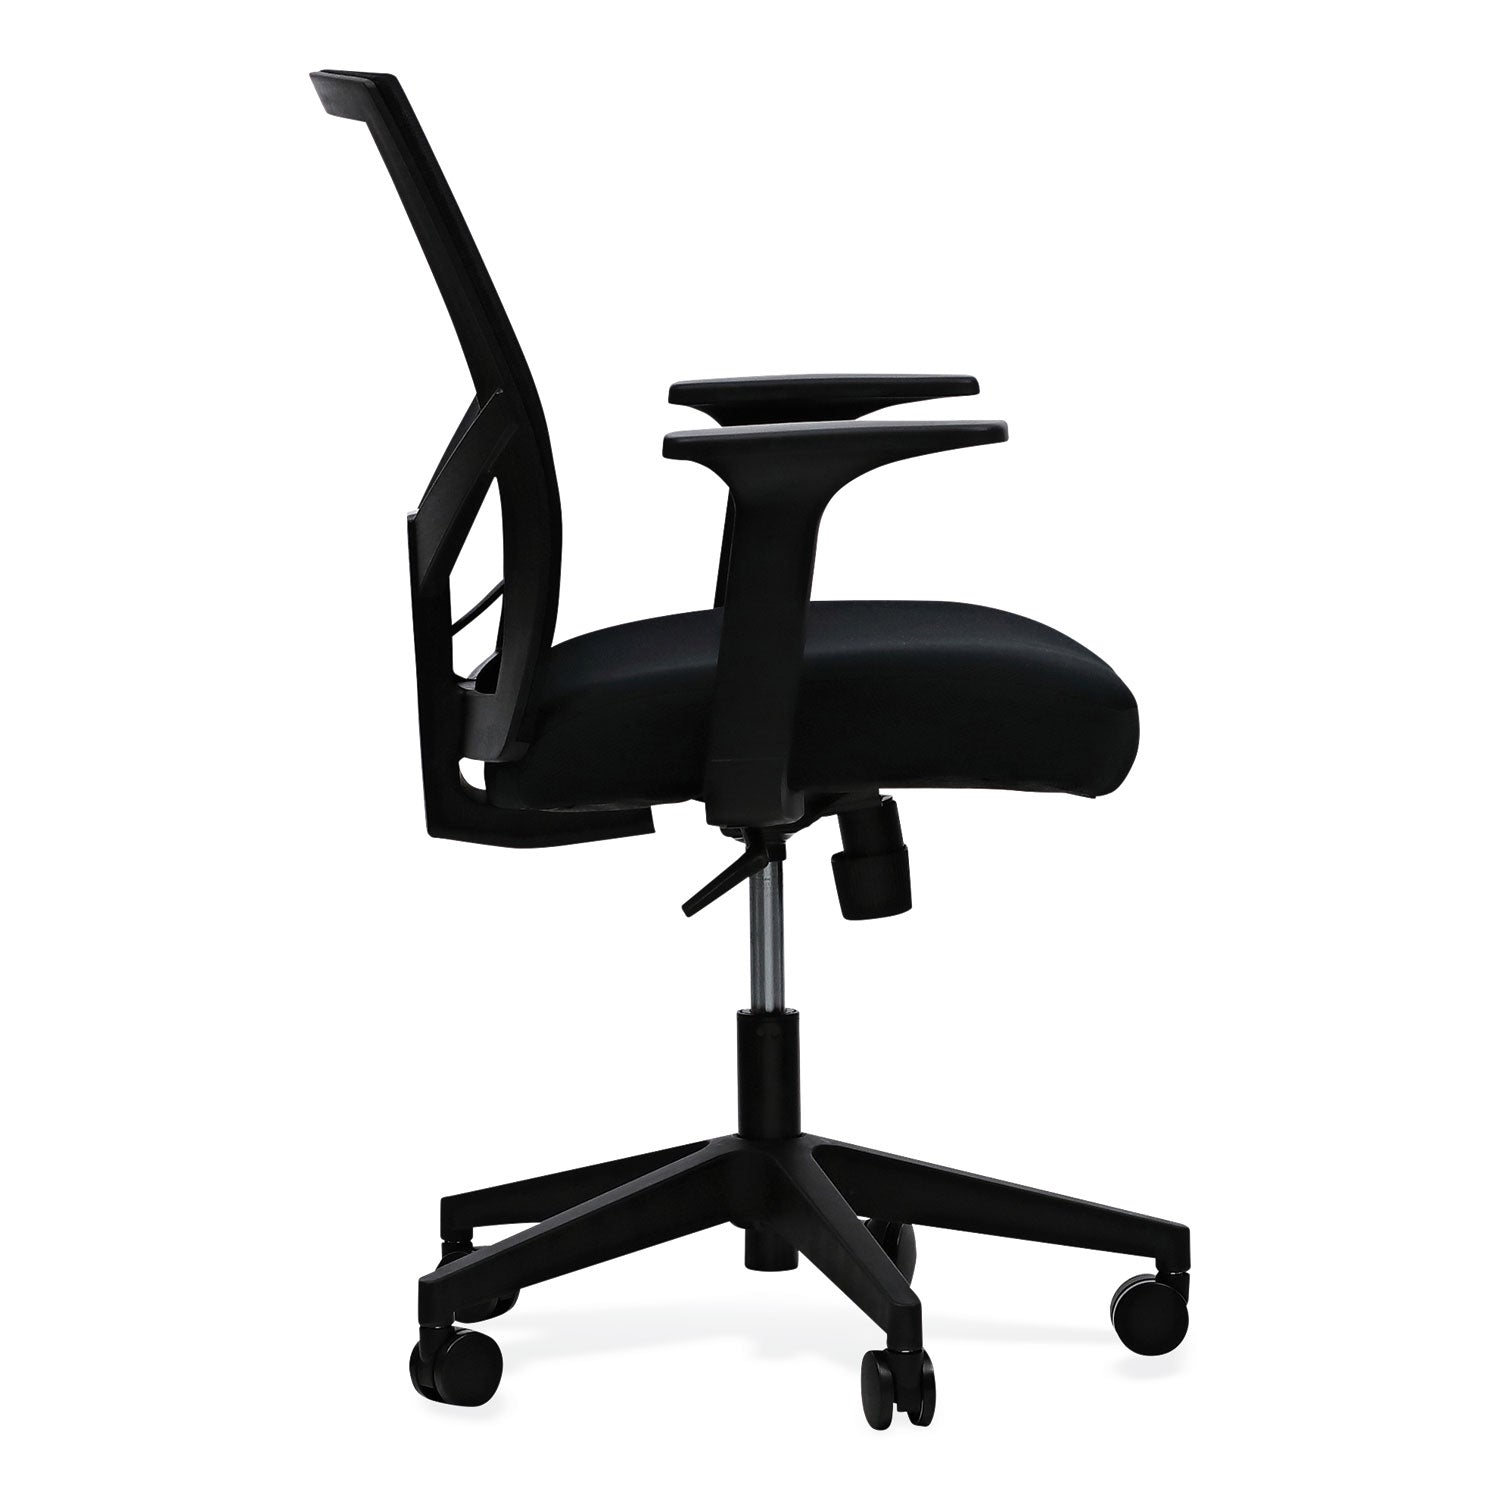 mesh-back-fabric-task-chair-supports-up-to-275-lb-1732-to-211-seat-height-black-seat-black-back_alews42b17 - 8